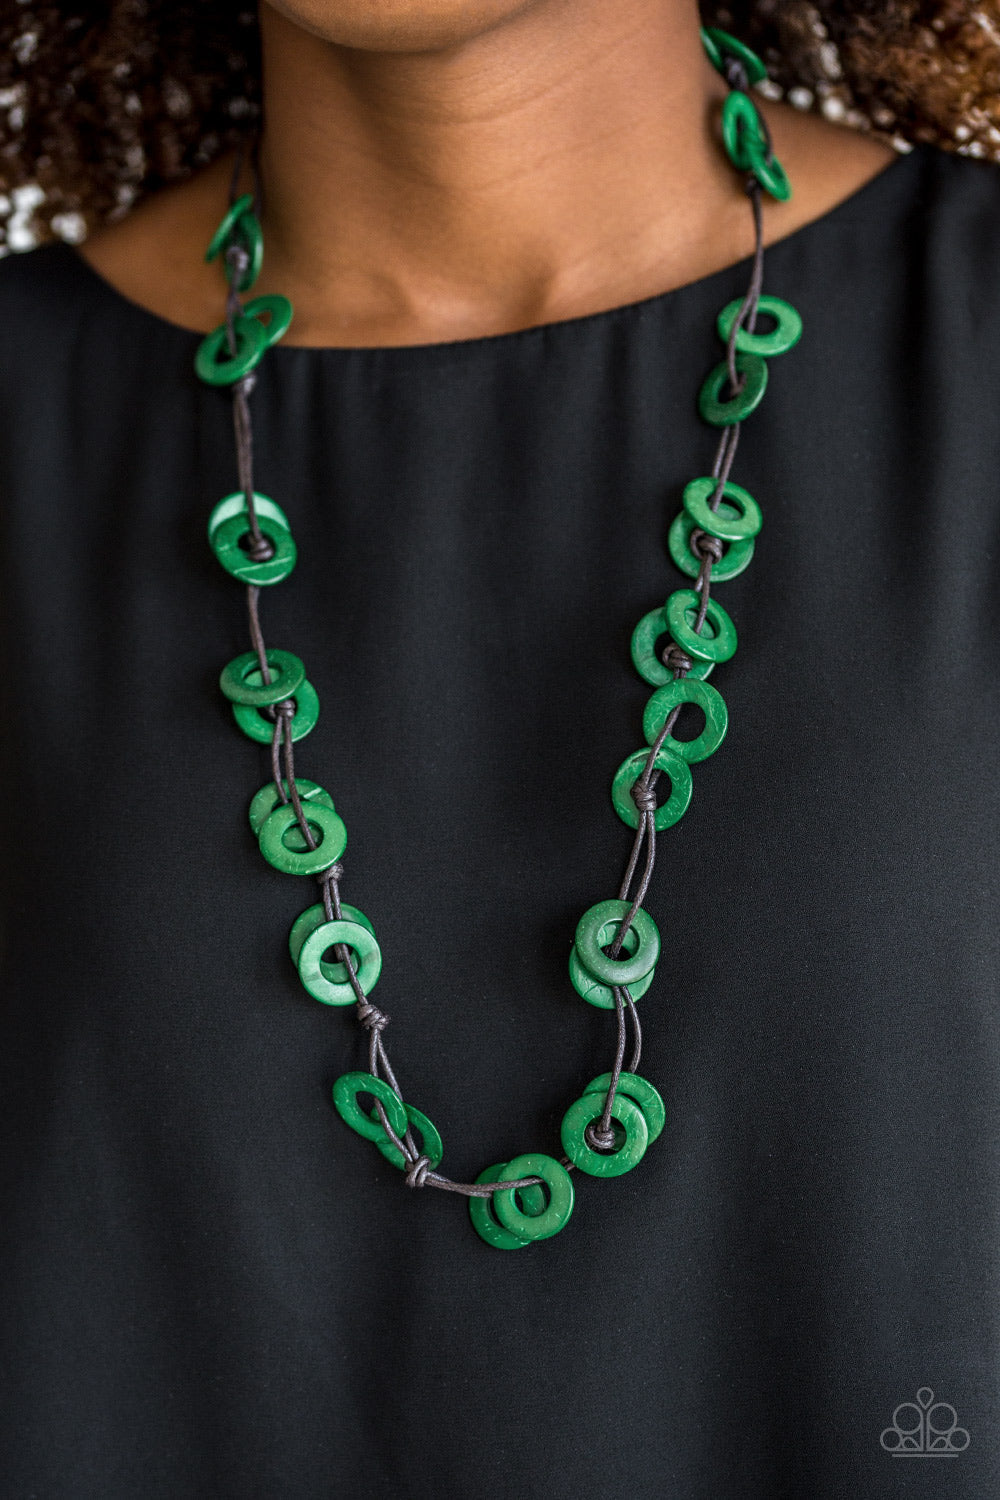 Waikiki Winds - Green Wood Necklace - Paparazzi Accessories - Shiny brown cording knots around refreshing green wooden discs, creating a colorful display across the chest. Features a button loop closure. Sold as one individual necklace.